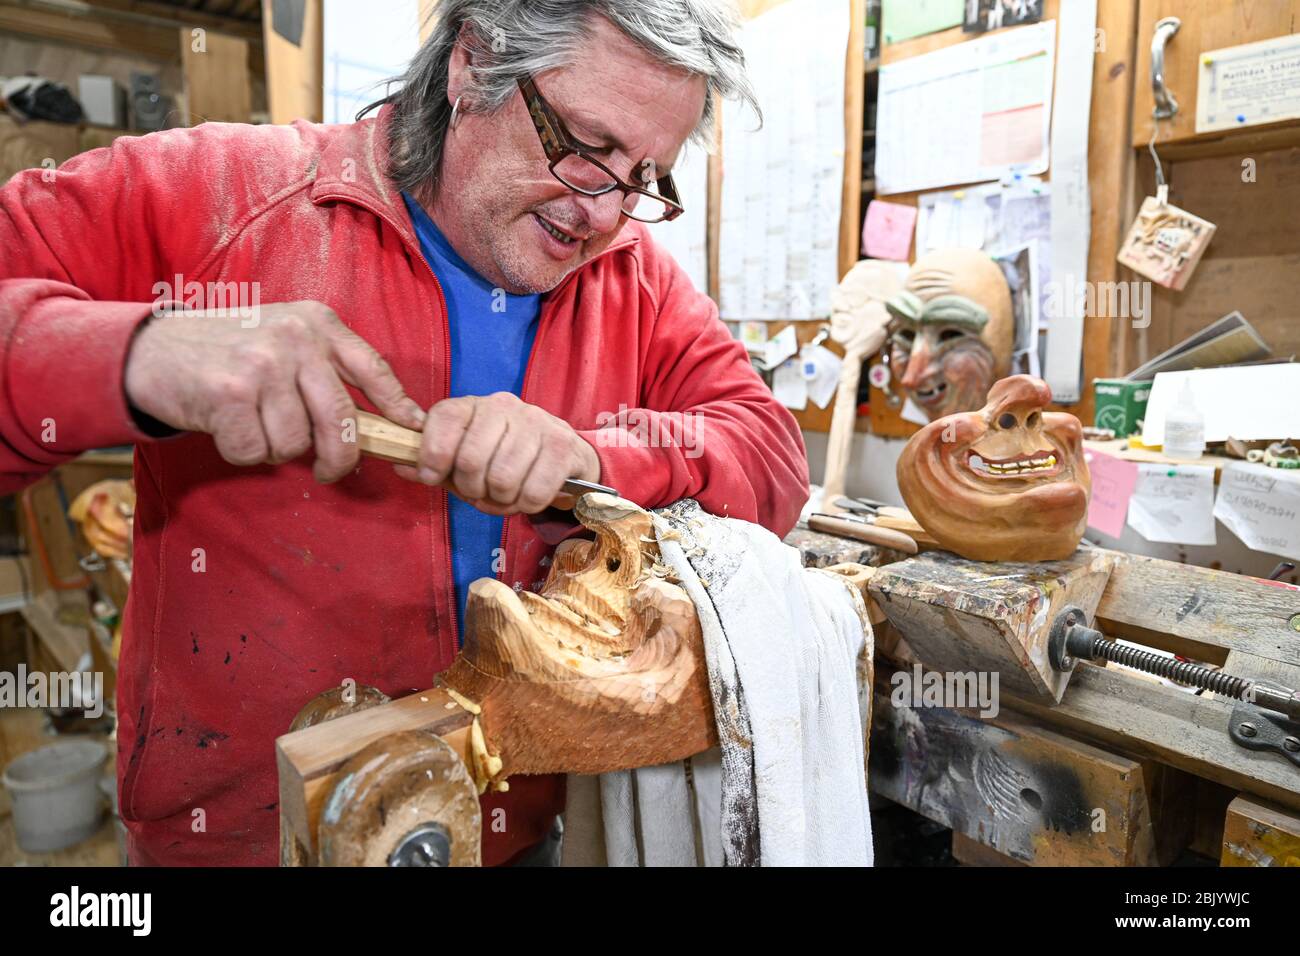 Ravensburg, Germany. 29th Apr, 2020. Mask carver Jogi Weiß carves a mask  from wood in his workshop. So that the smile is not hidden behind a  mouthguard during the Corona crisis, Jogi